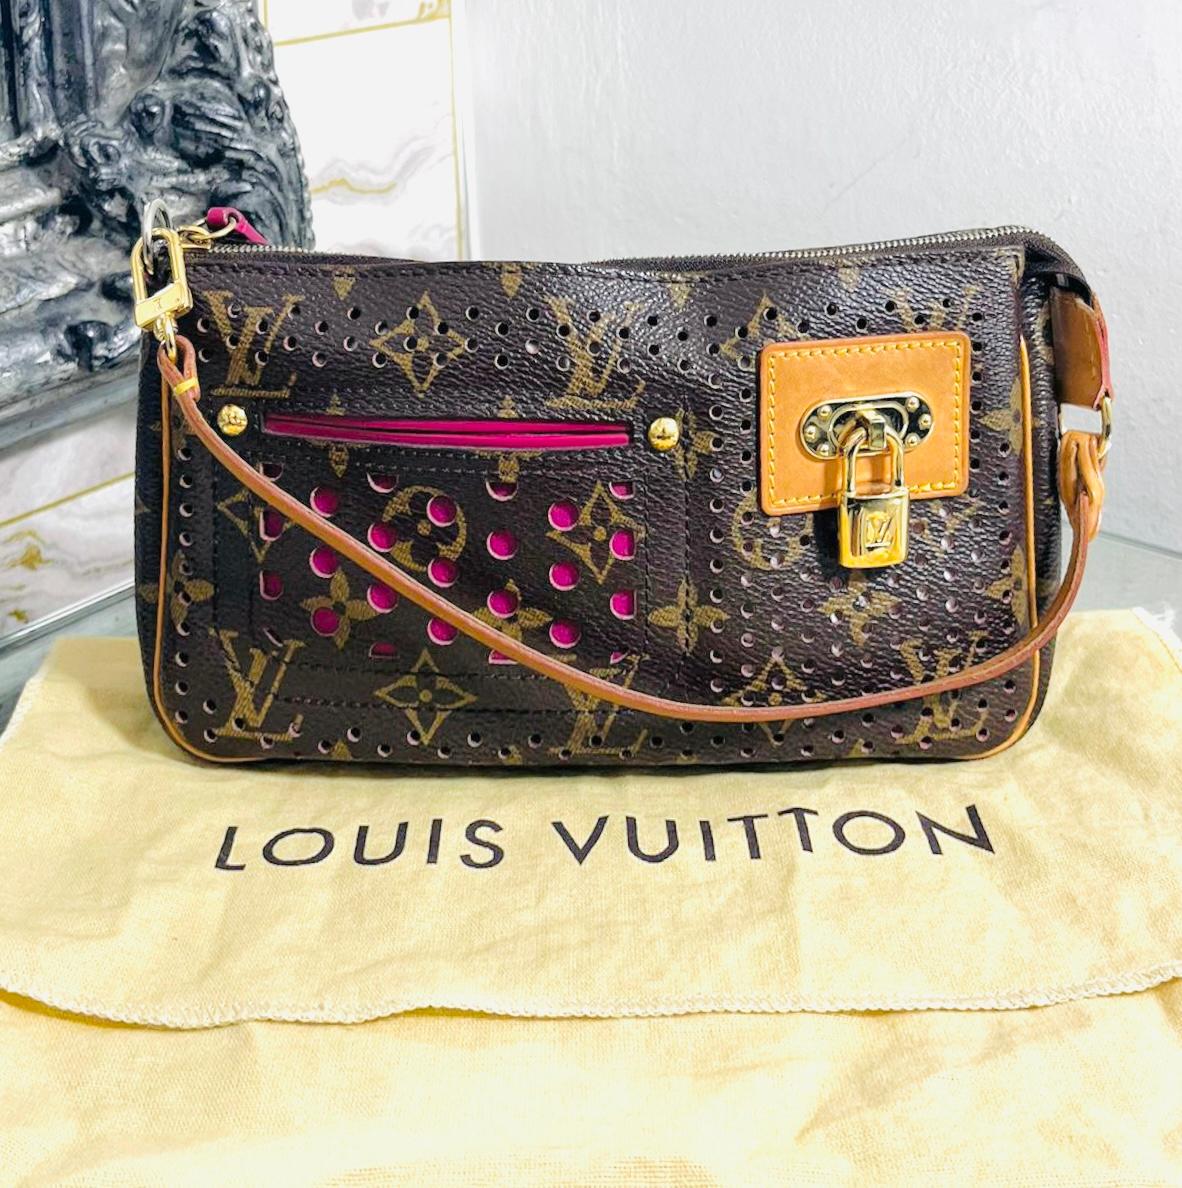 Louis Vuitton Monogram Perforated Coated Canvas Pochette Accessoires Bag

Brown shoulder bag designed with signature monogram throughout.

Detailed with perforated exterior with contrasting, bright pink Alcantara lining.

Featuring detachable,